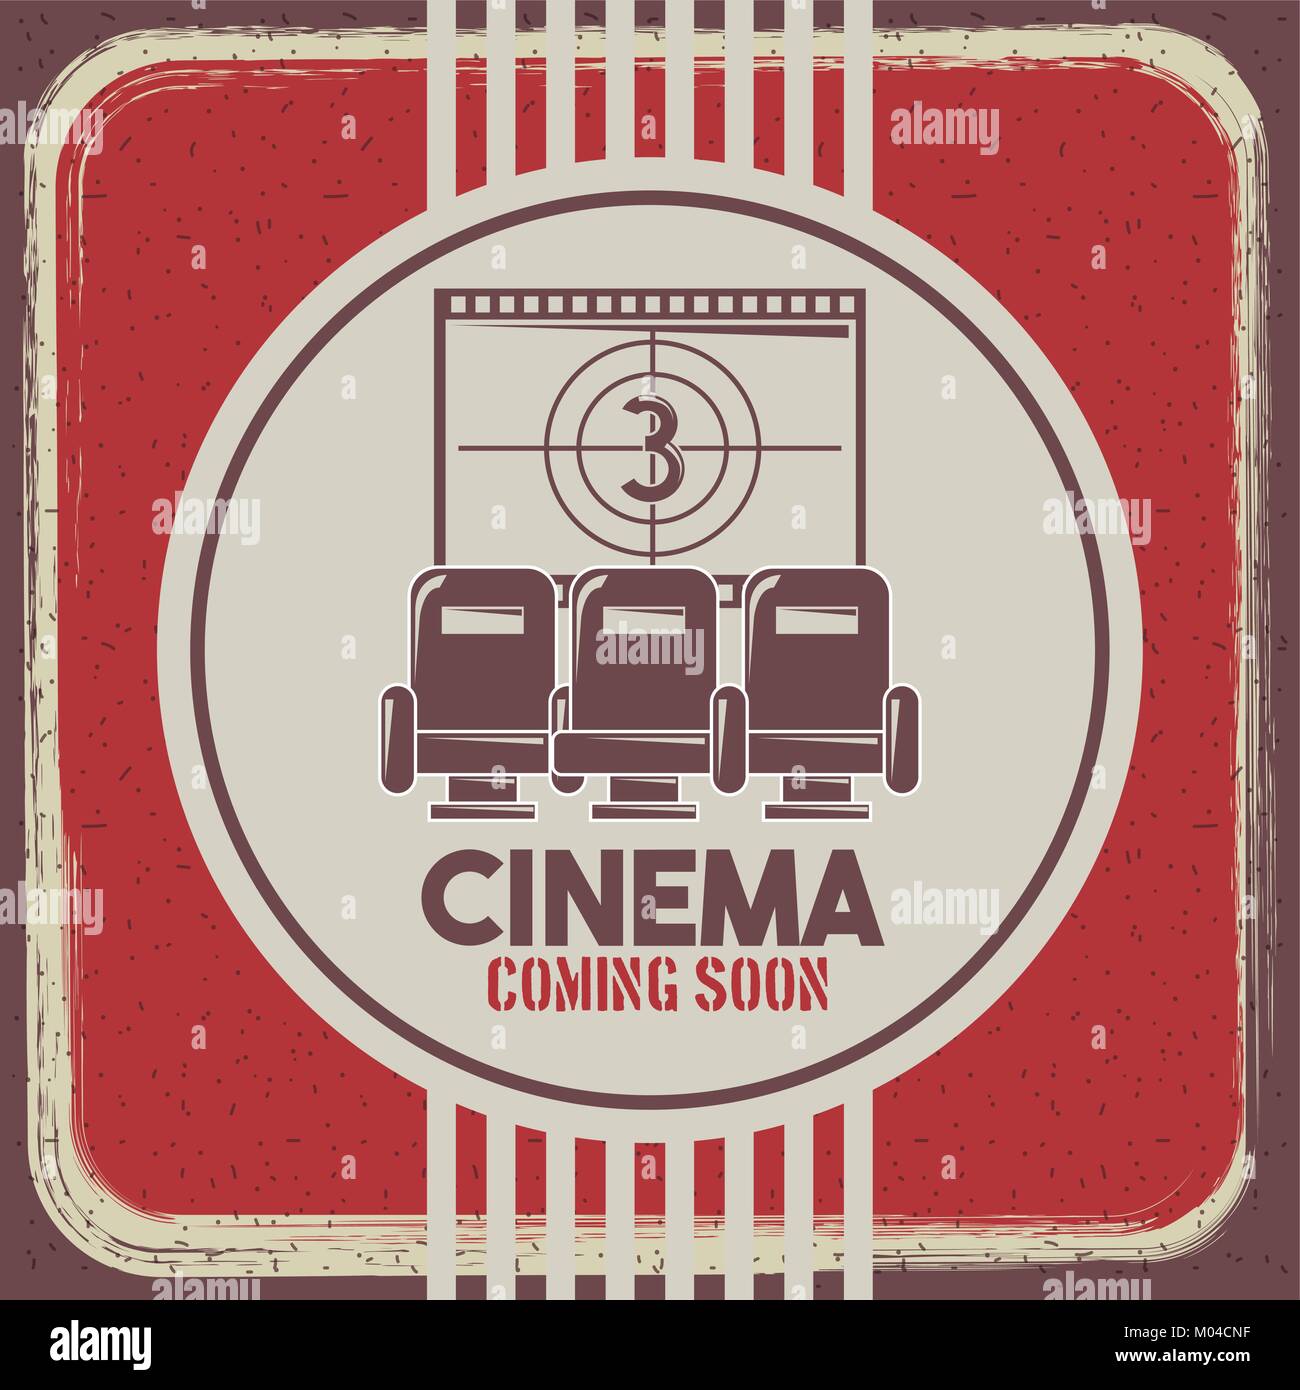 cinema coming soon poster retro style seats and film strip countdown Stock Vector